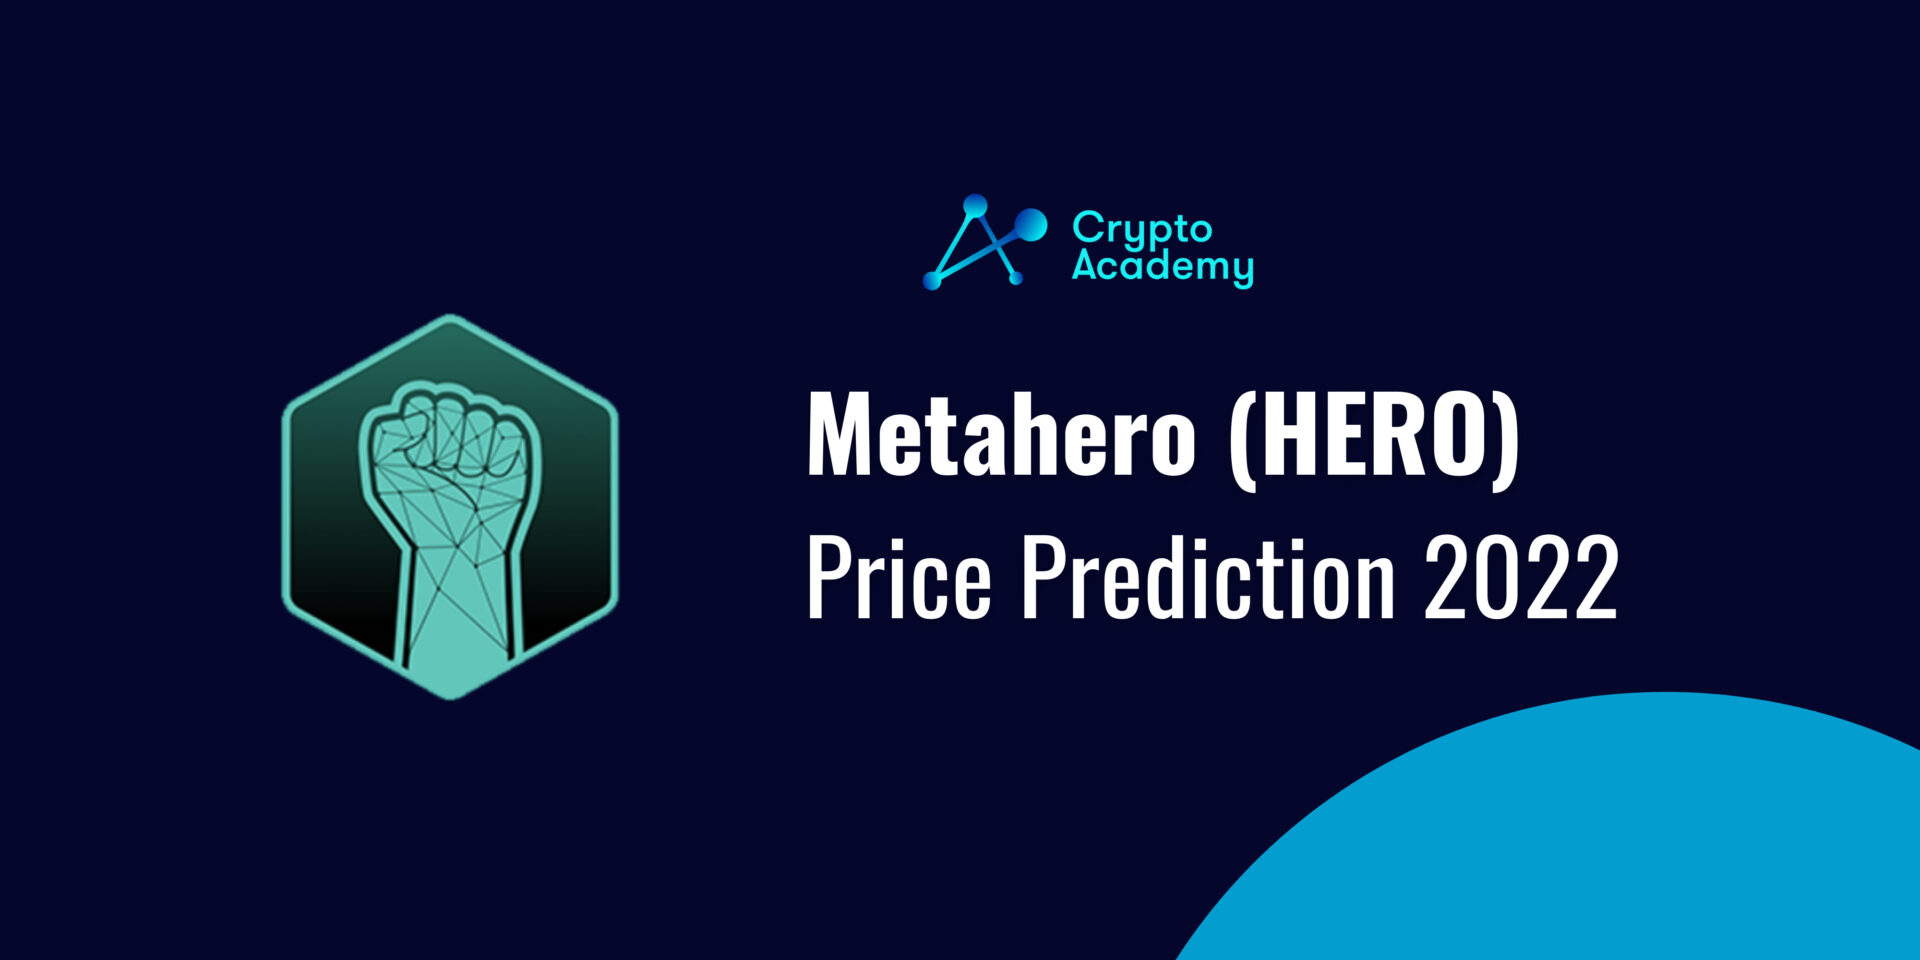 Metahero Price Prediction 2022 and Beyond - Can HERO Eventually Reach $1?